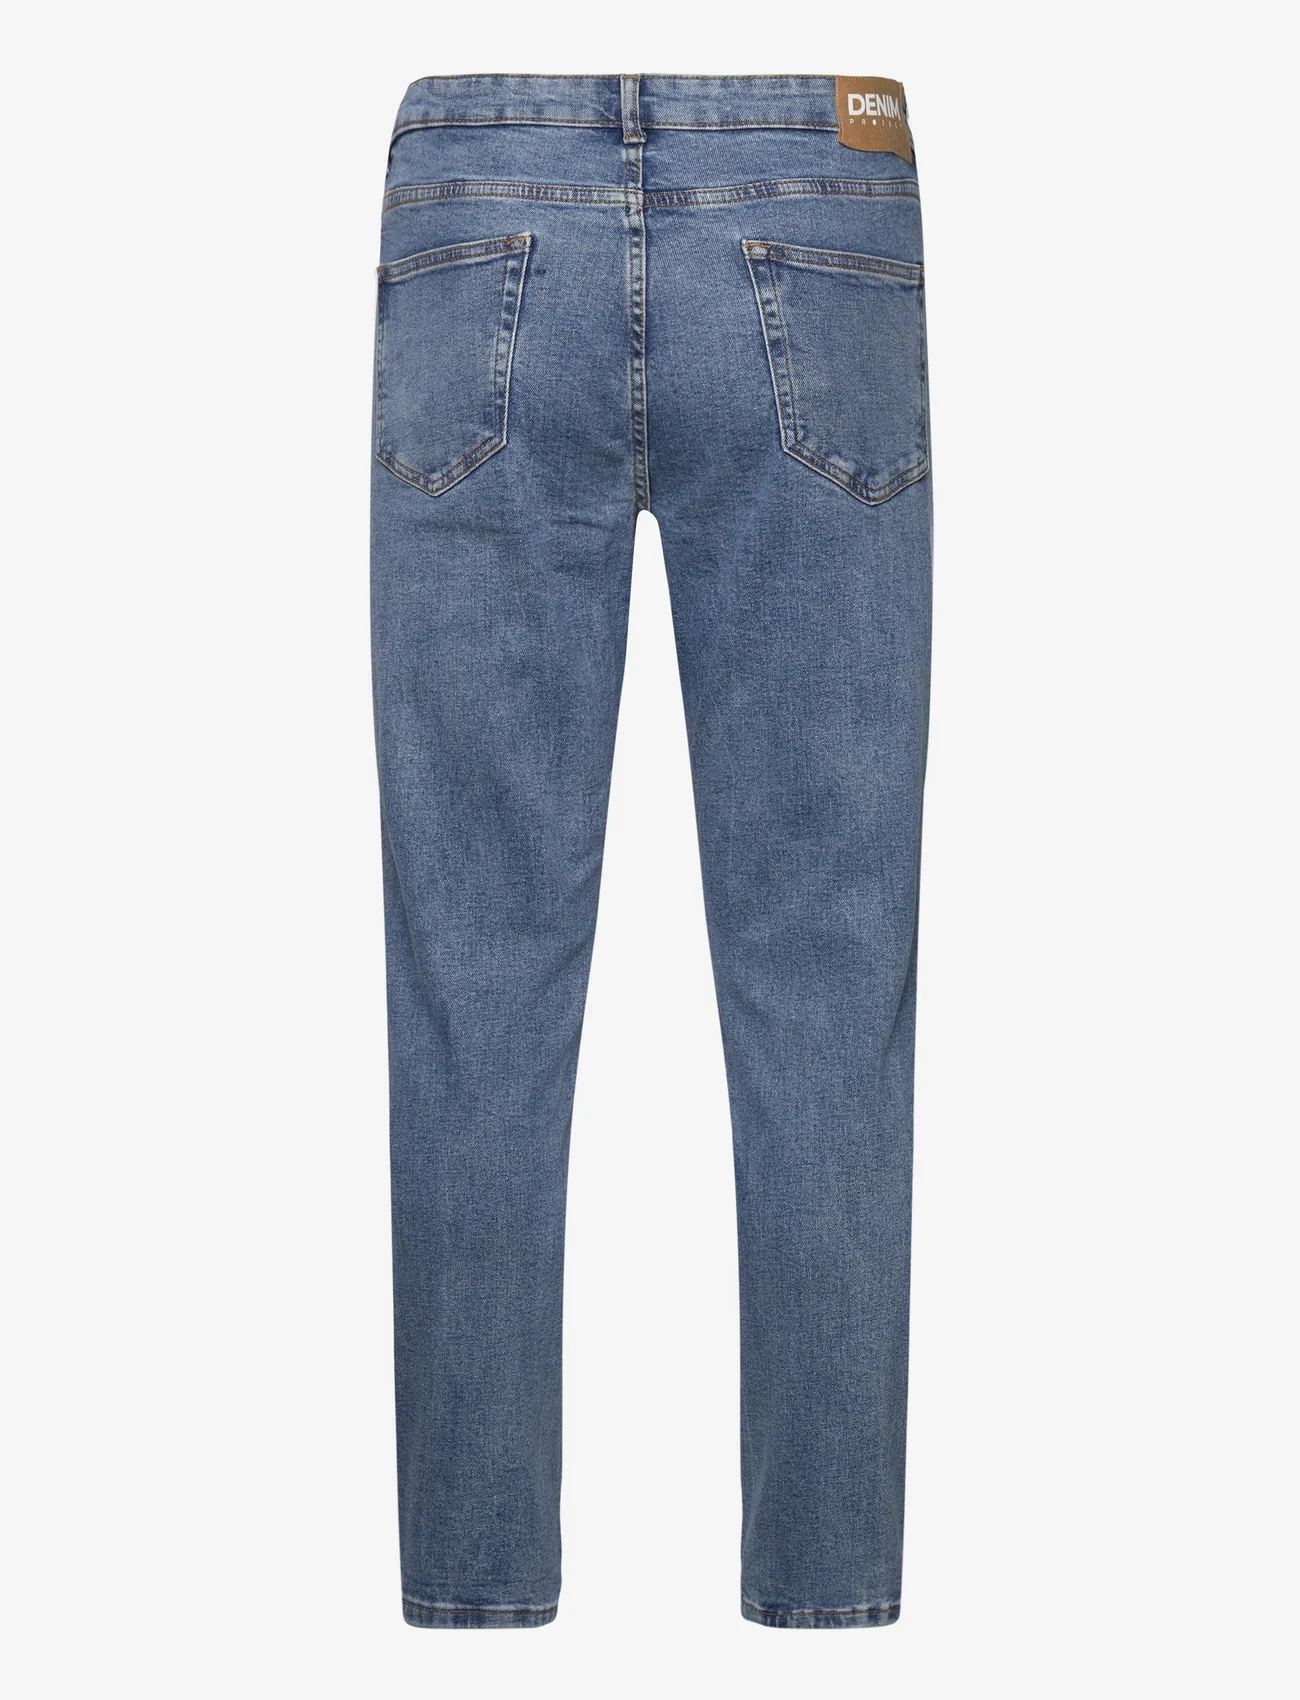 Denim project - DPRecycled Loose Jeans - loose jeans - medium stone wash - 1